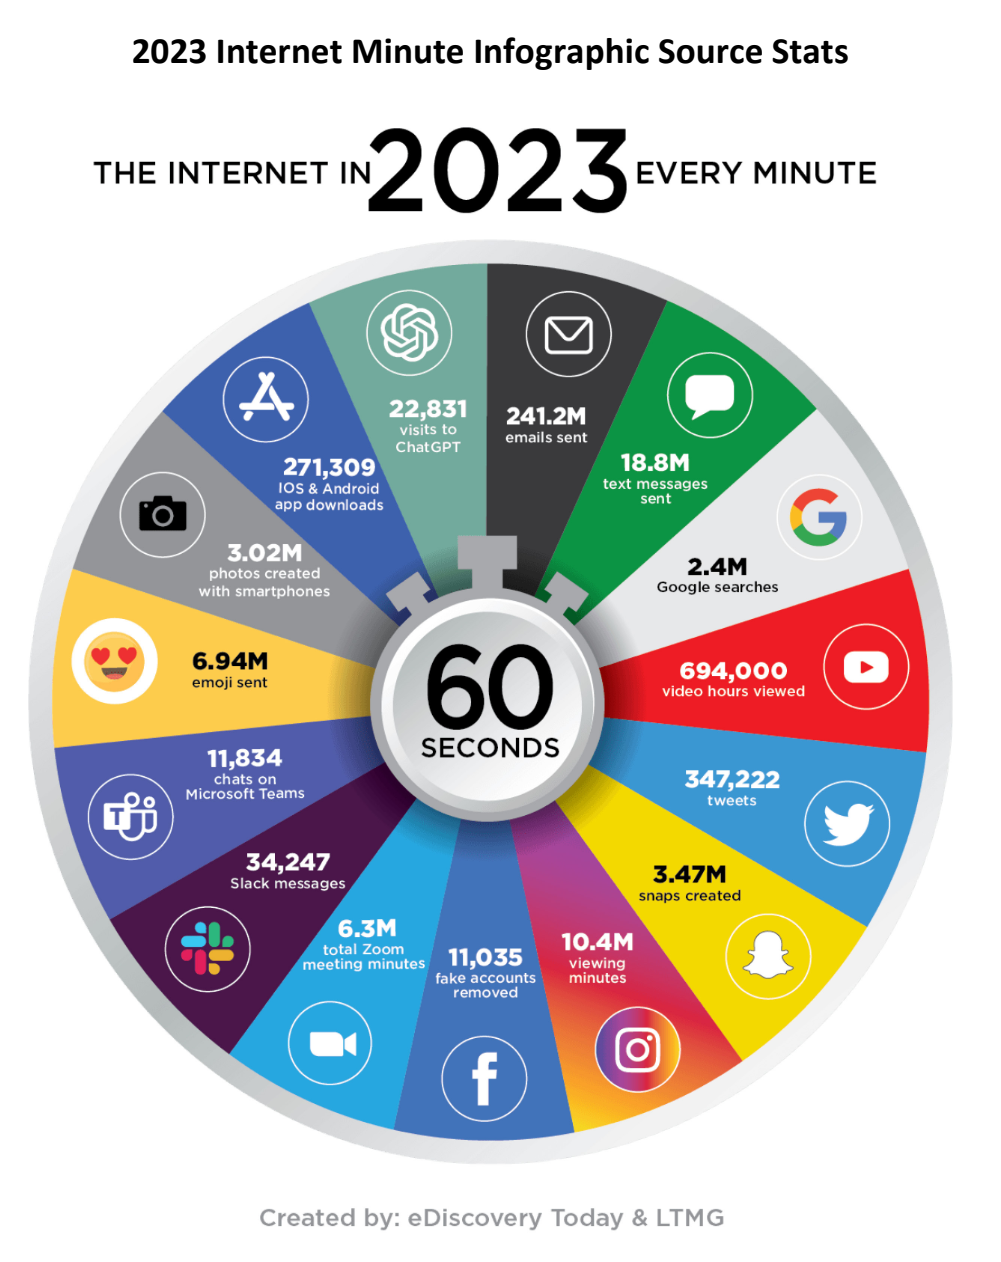 Infographic: What Happens in an Internet Minute in 2019?